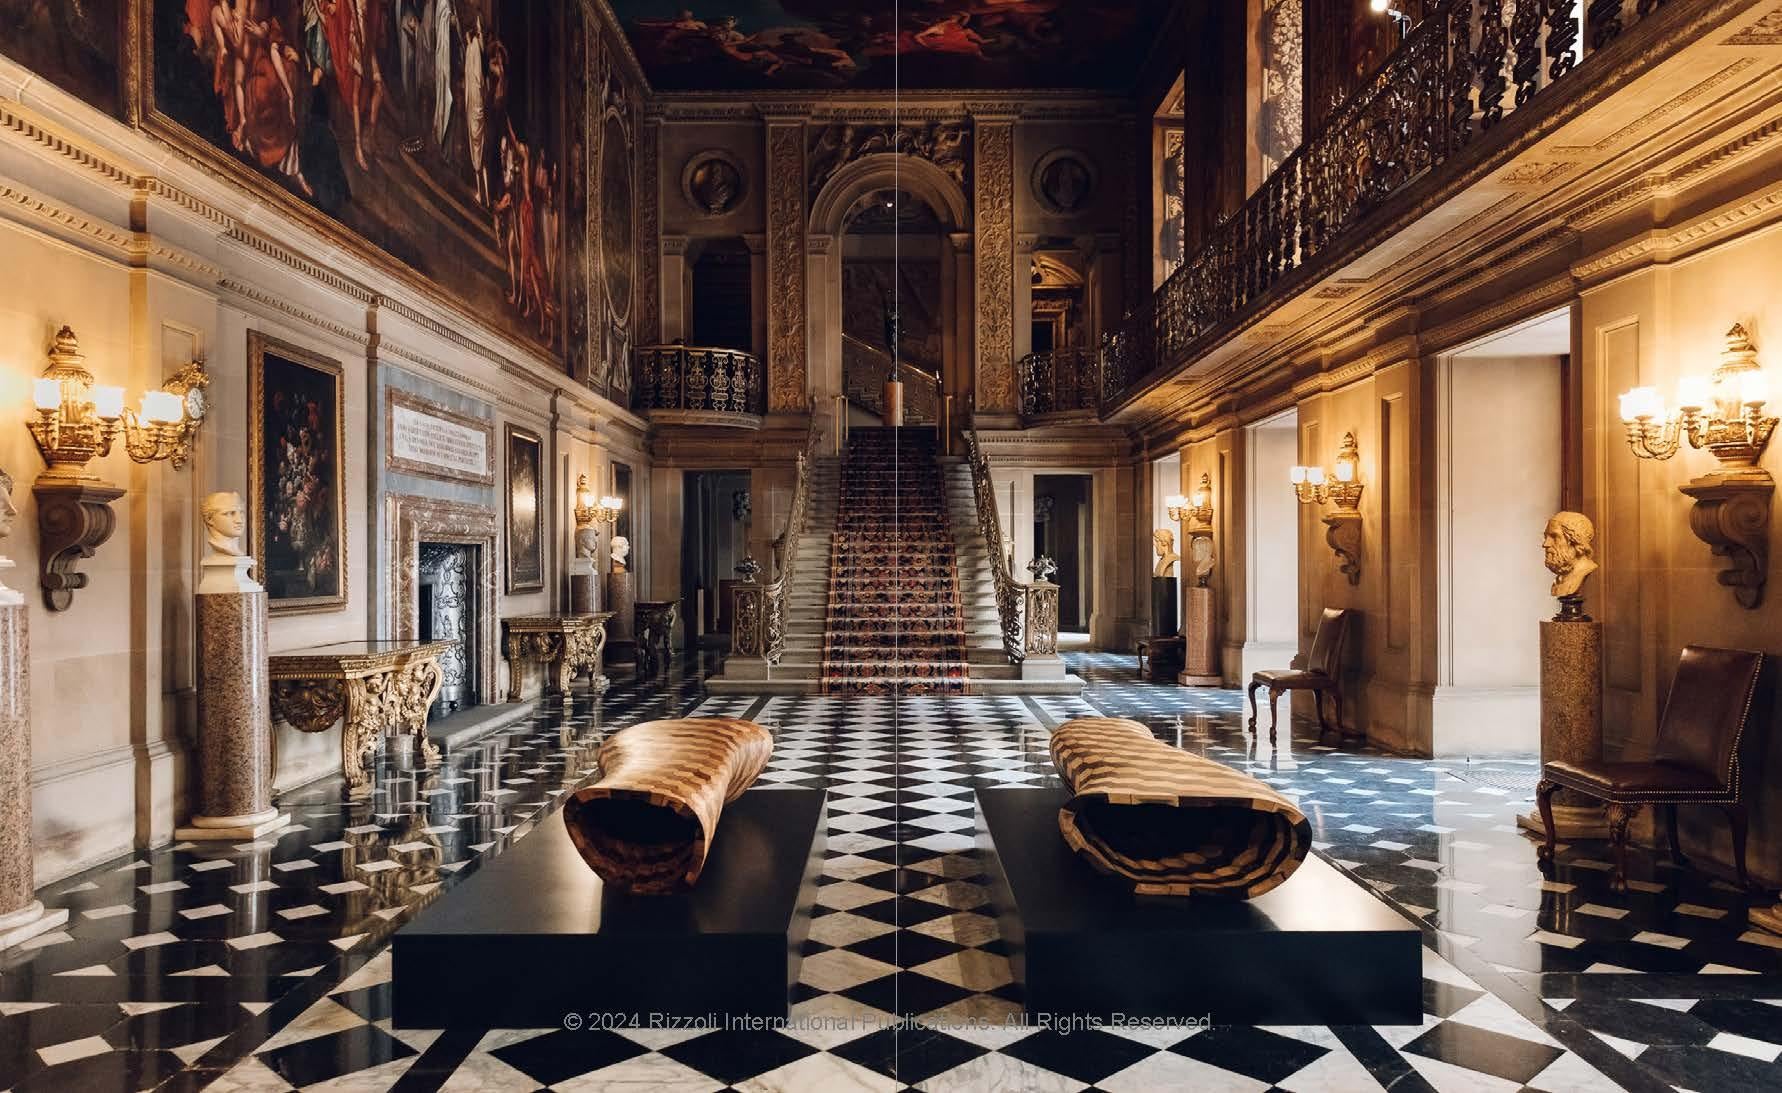 The world’s most important contemporary designers showcase their work within the historic setting of Chatsworth House to shine light and spark conversation on the intriguing juxtaposition of the old and the new, the past and the future, and the